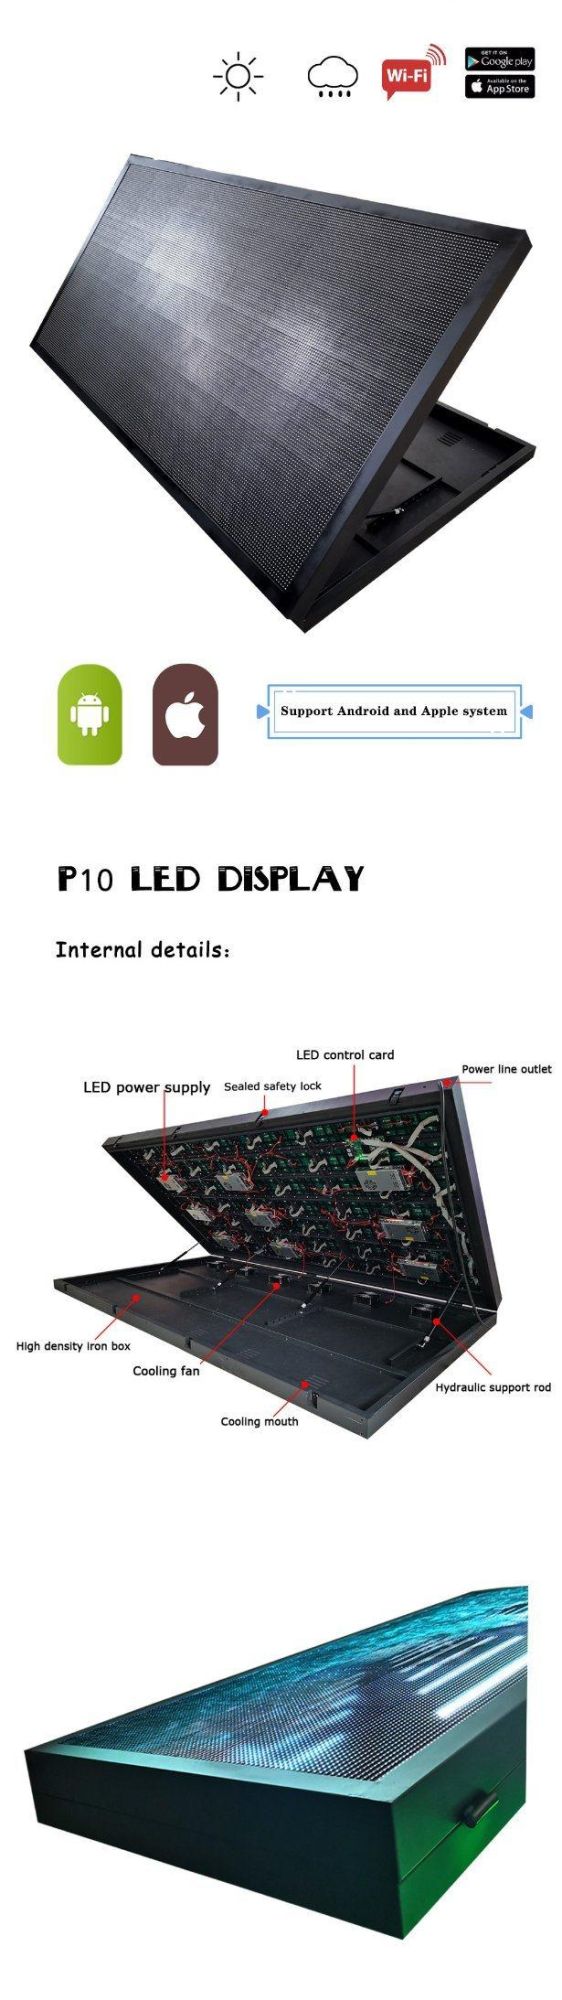 Pendant Mounting Commercial Full Color LED Display Panel Material